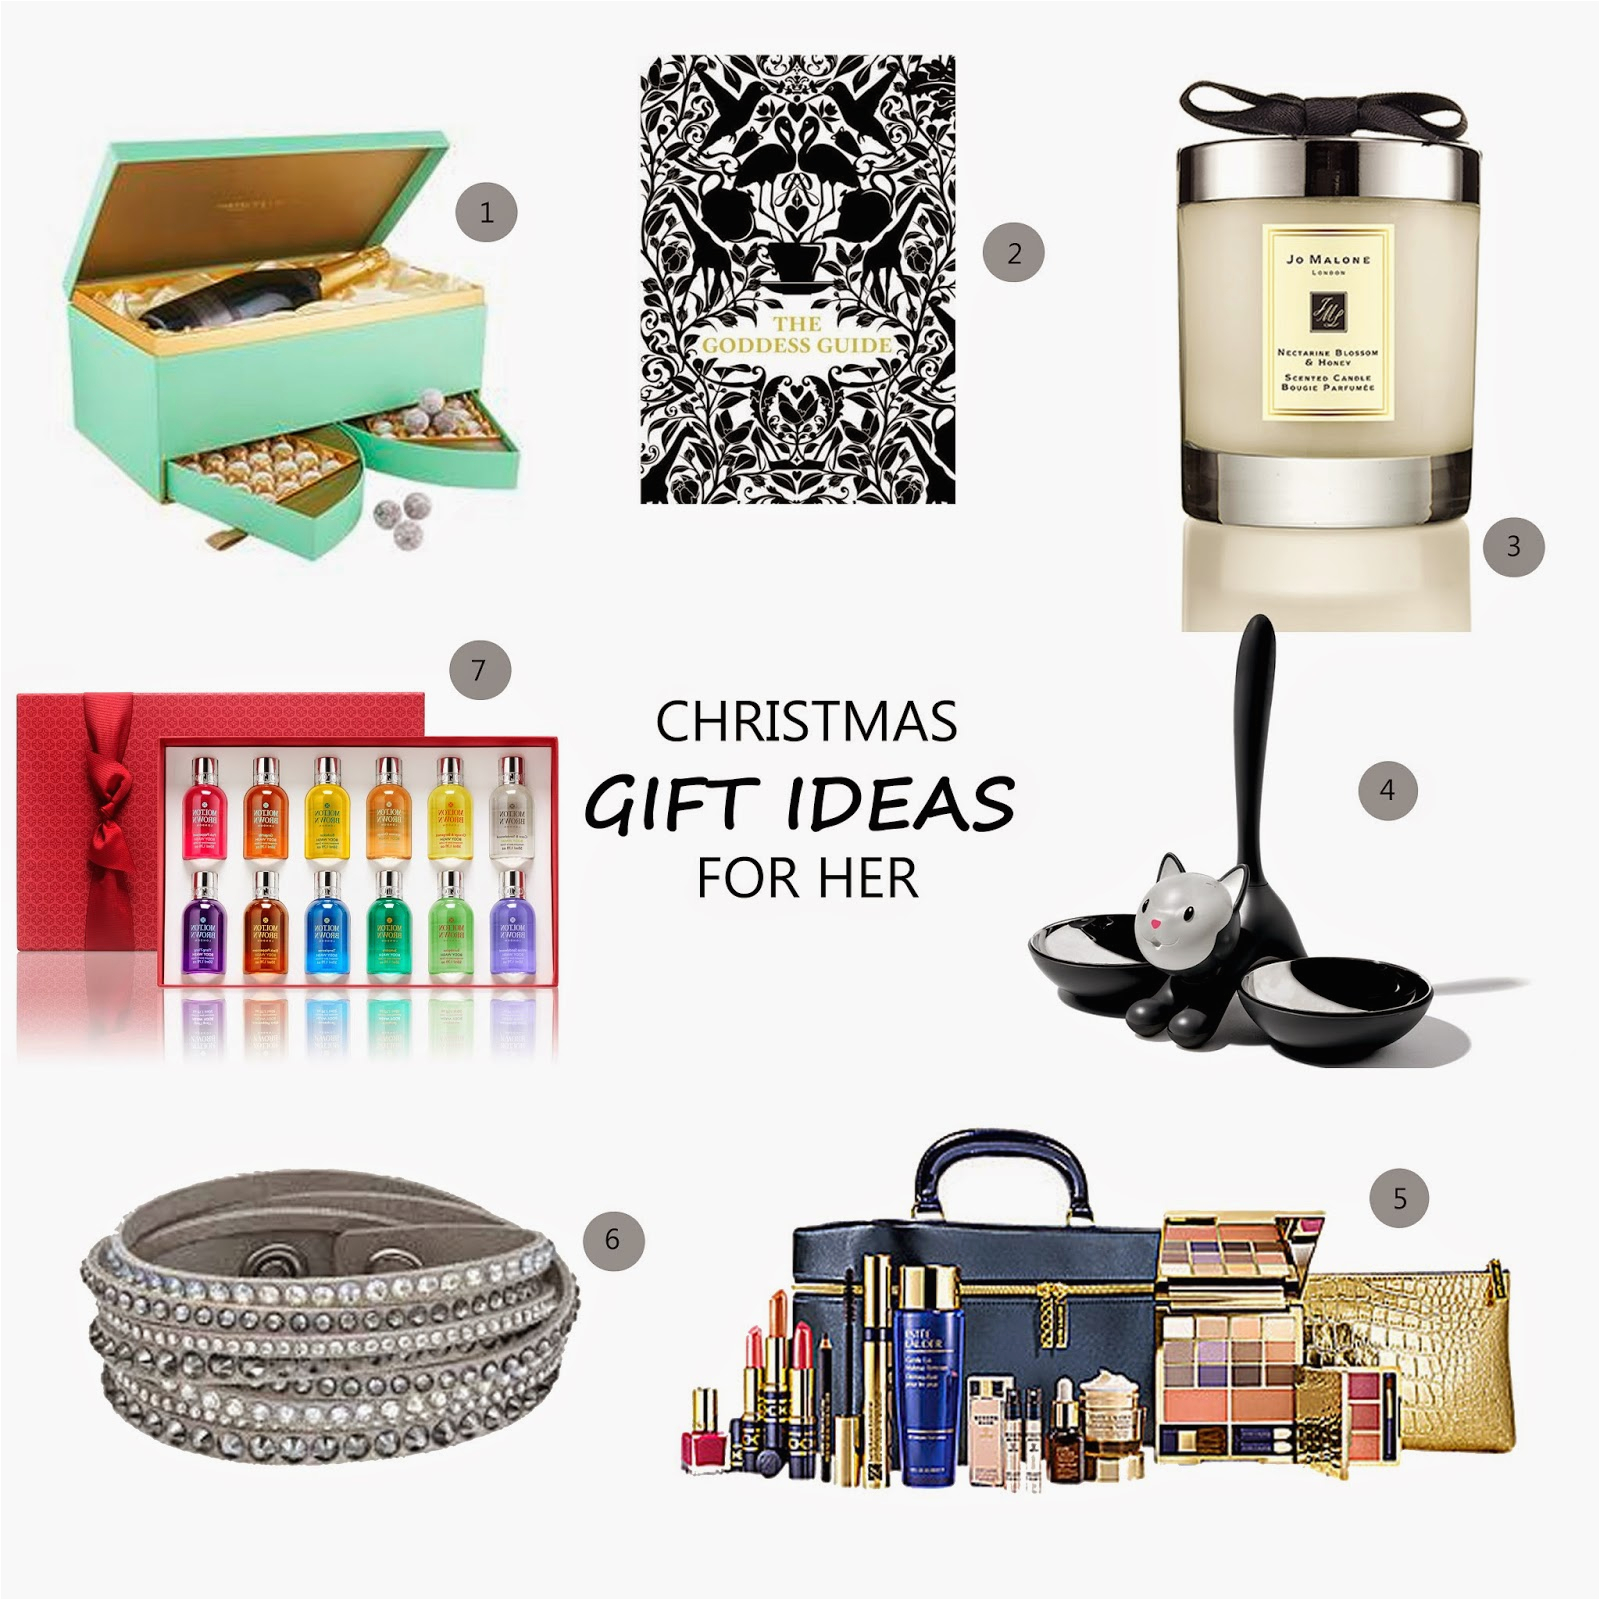 7 christmas gift ideas for her loved by laura